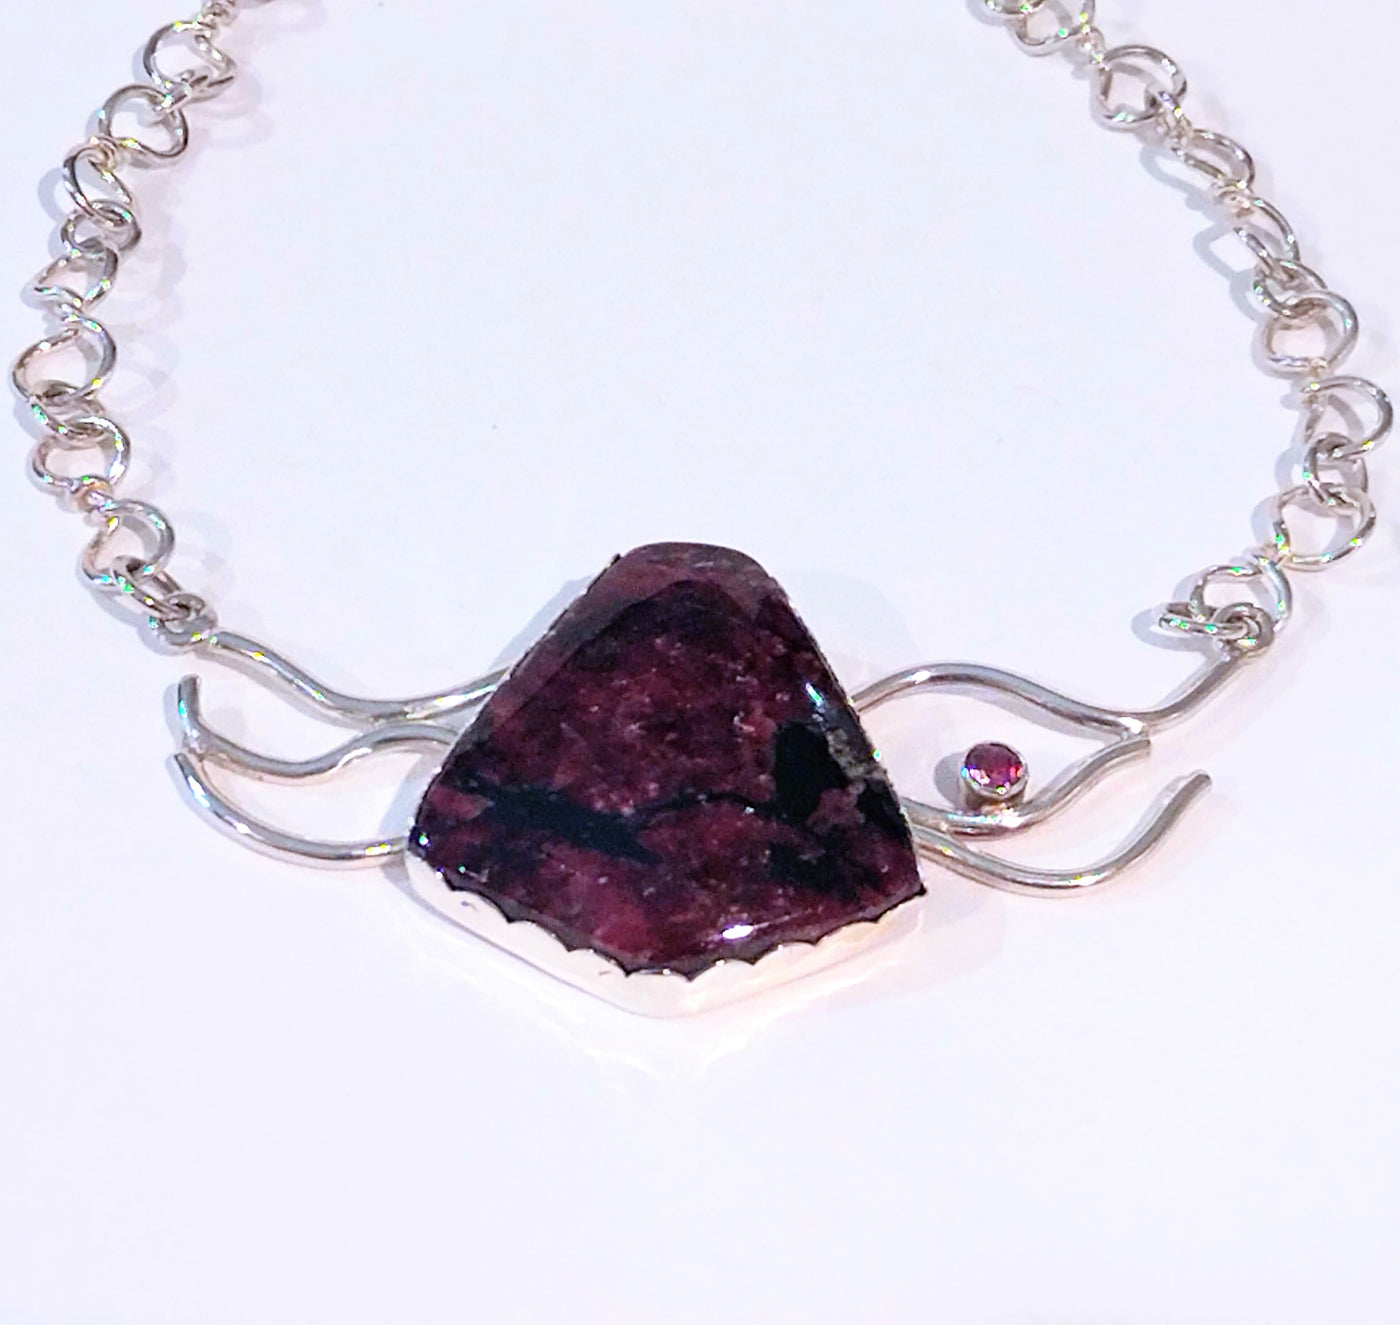 VC093 - Eudialyte & Garnet Wave Pendant with Fine Silver Chain